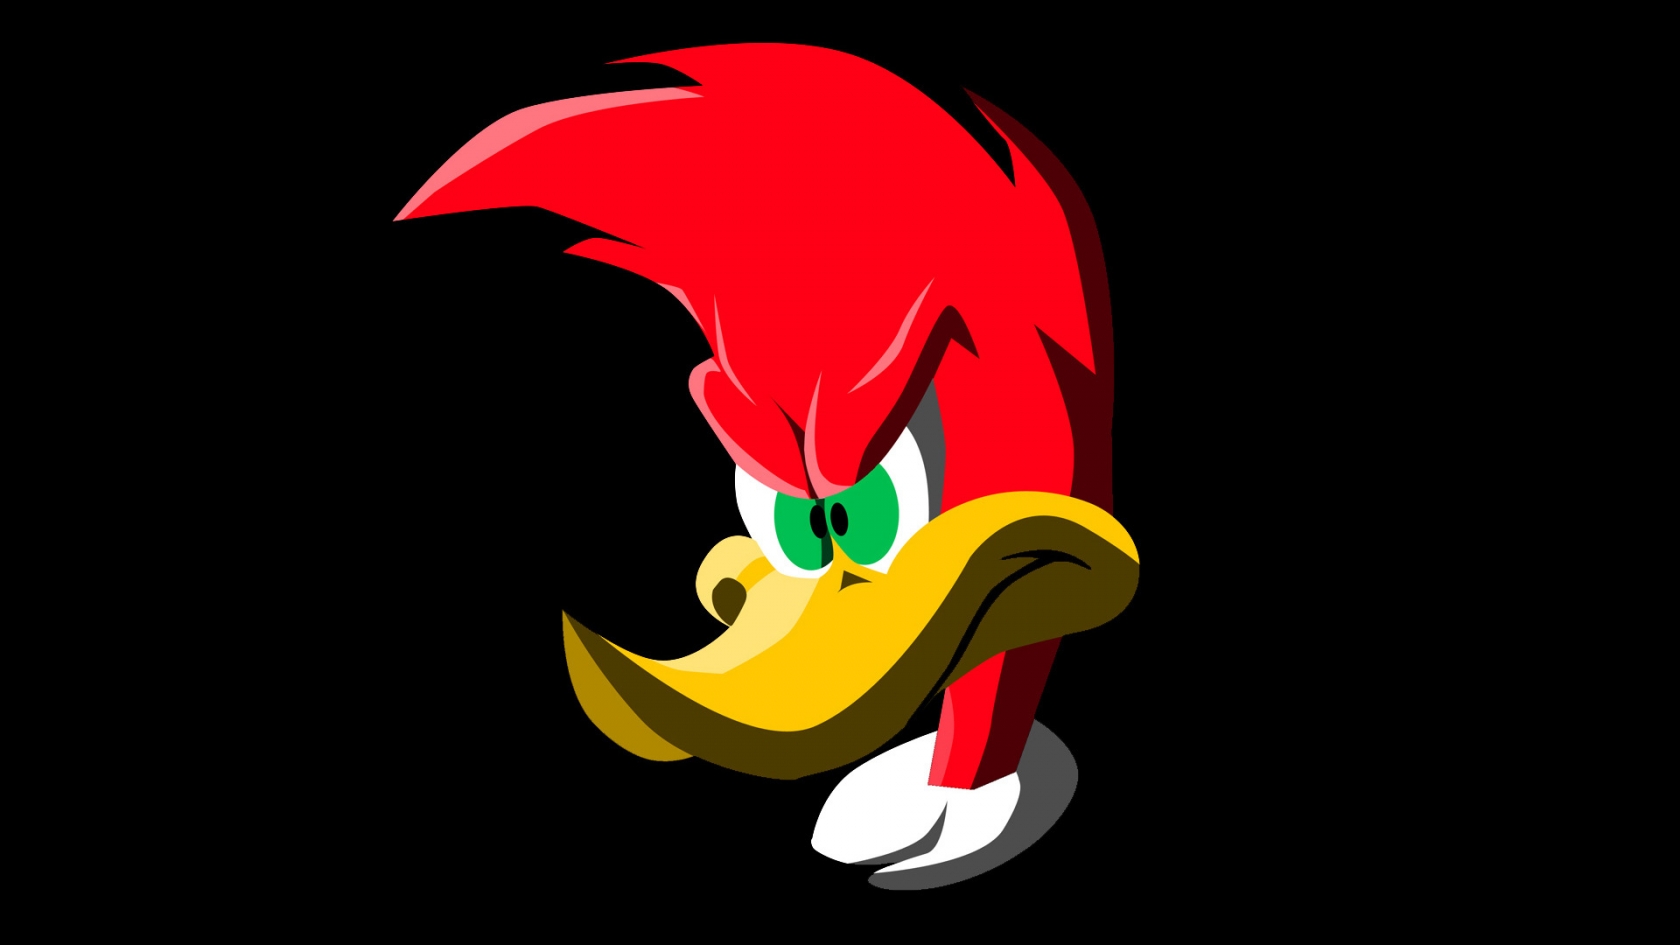 Woody Woodpecker for 1680 x 945 HDTV resolution